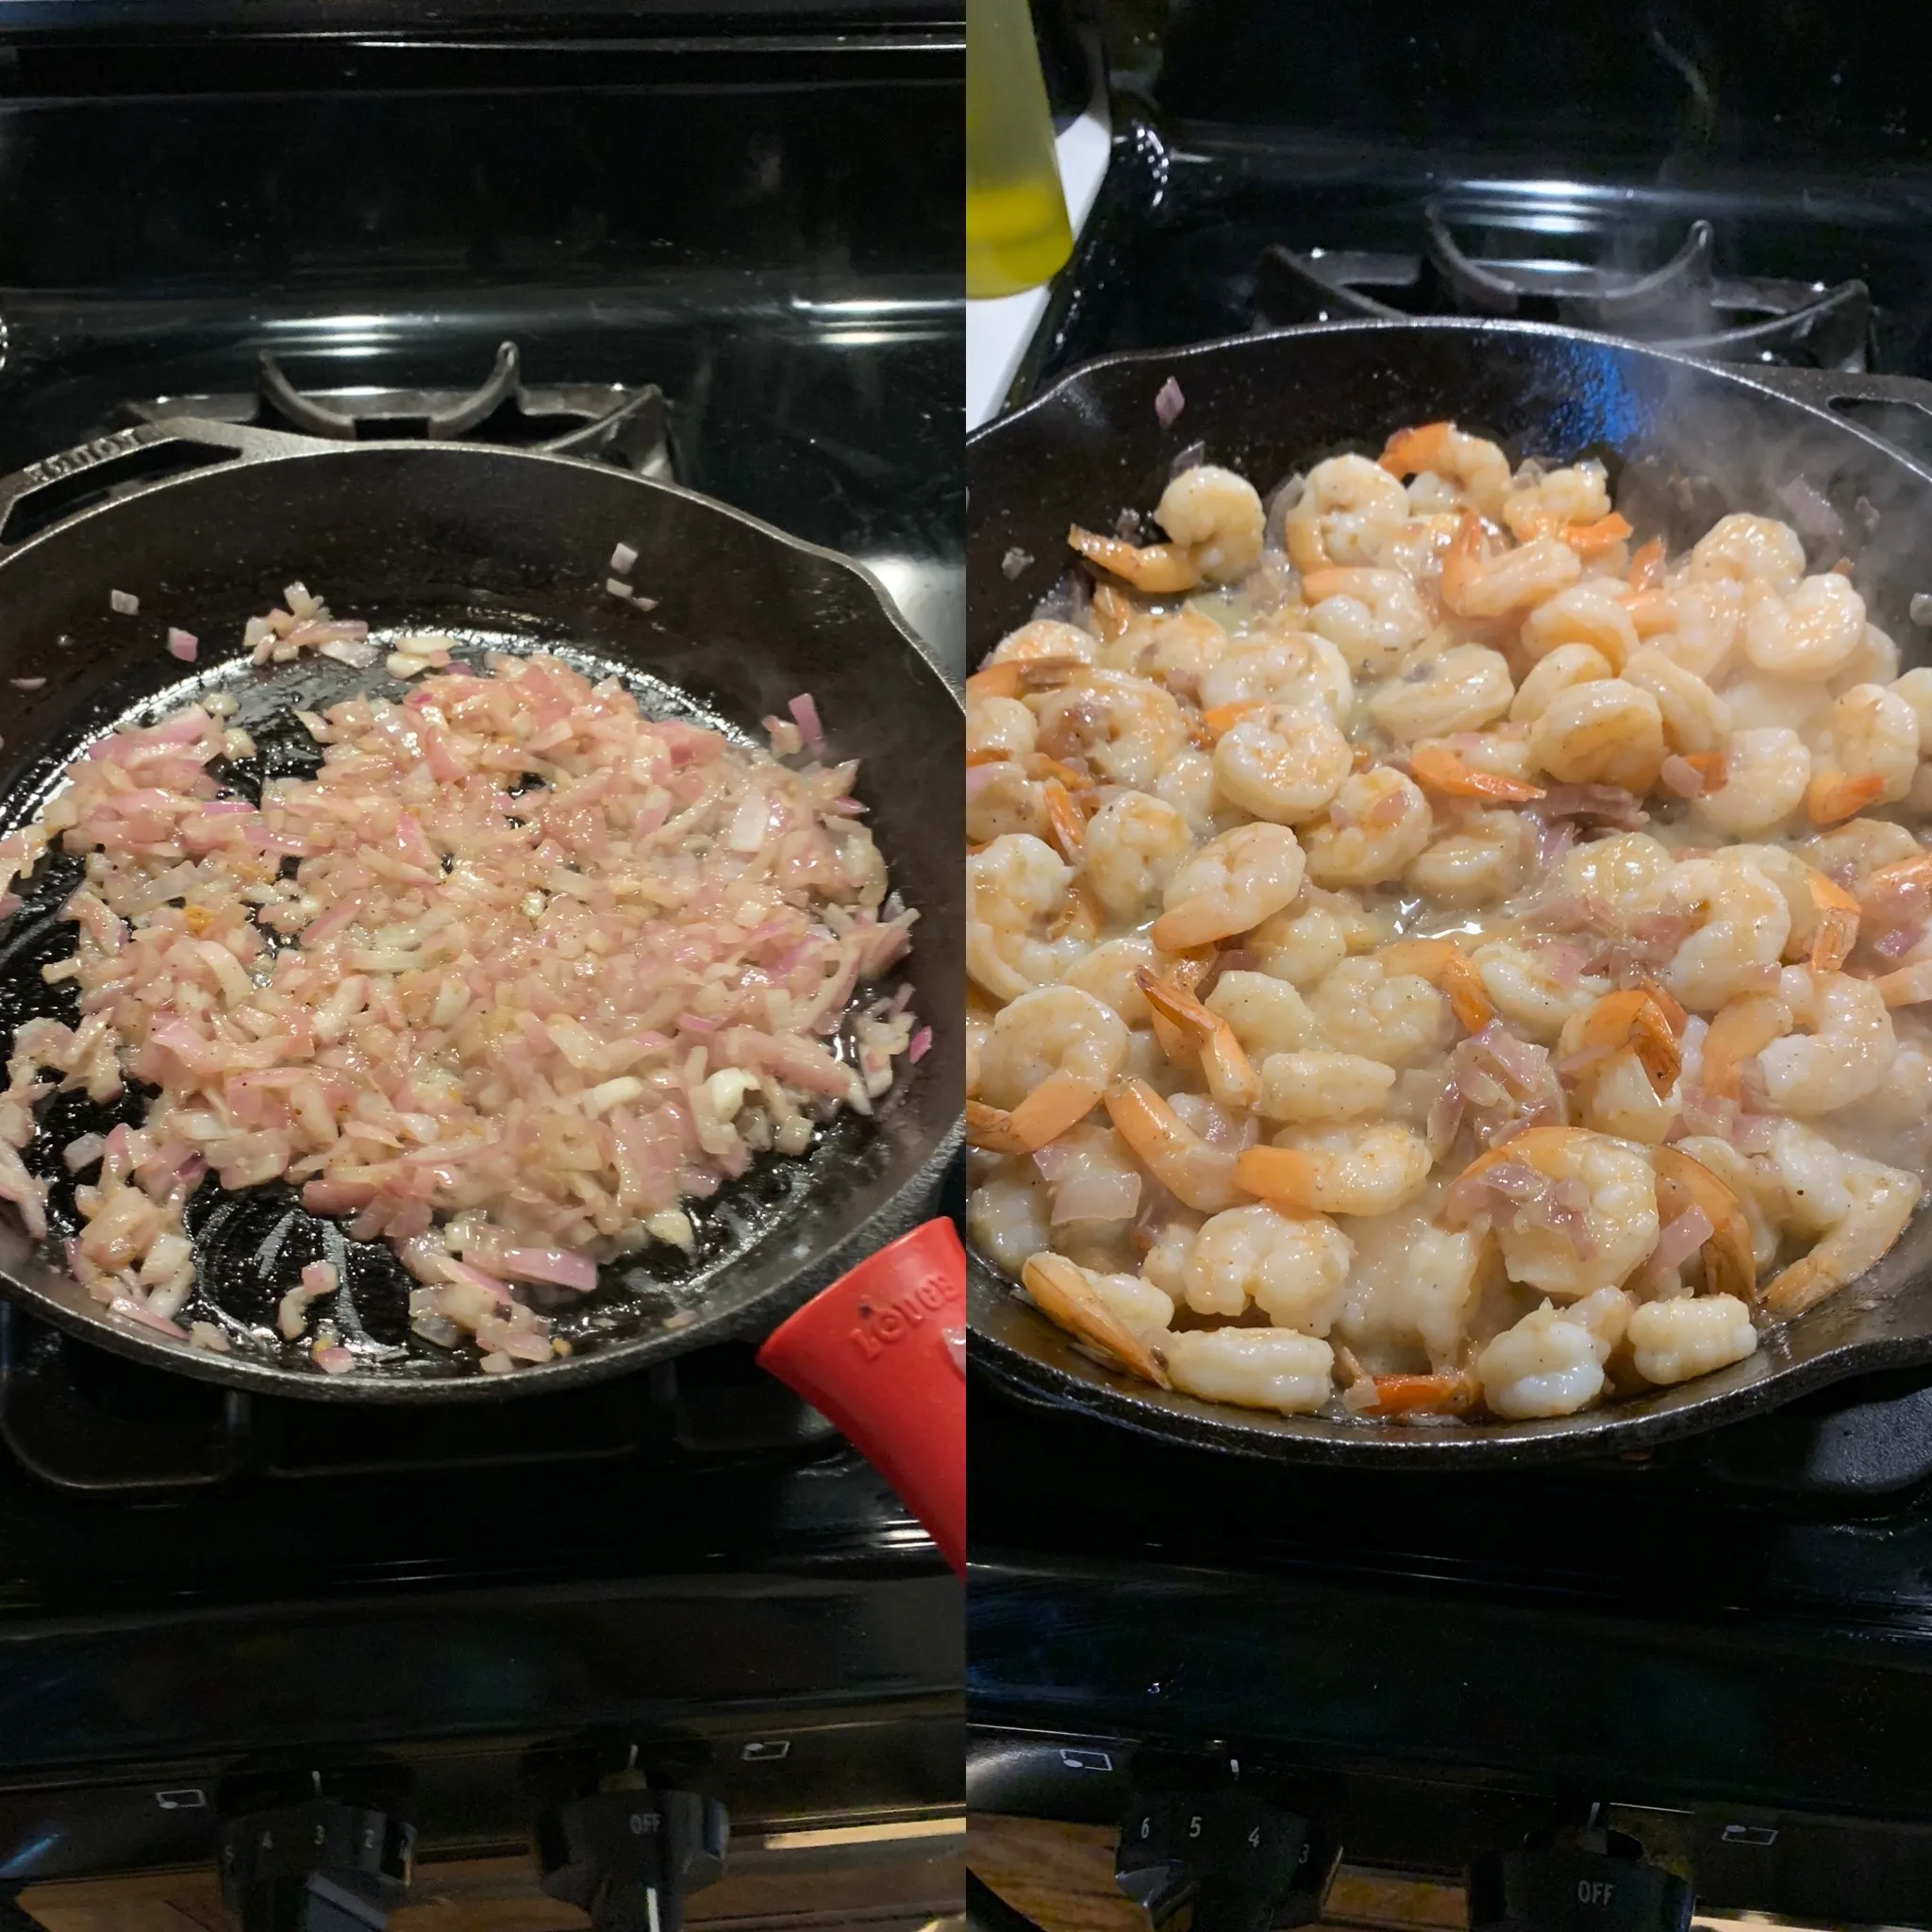 Cooking the red onions and the shrimp